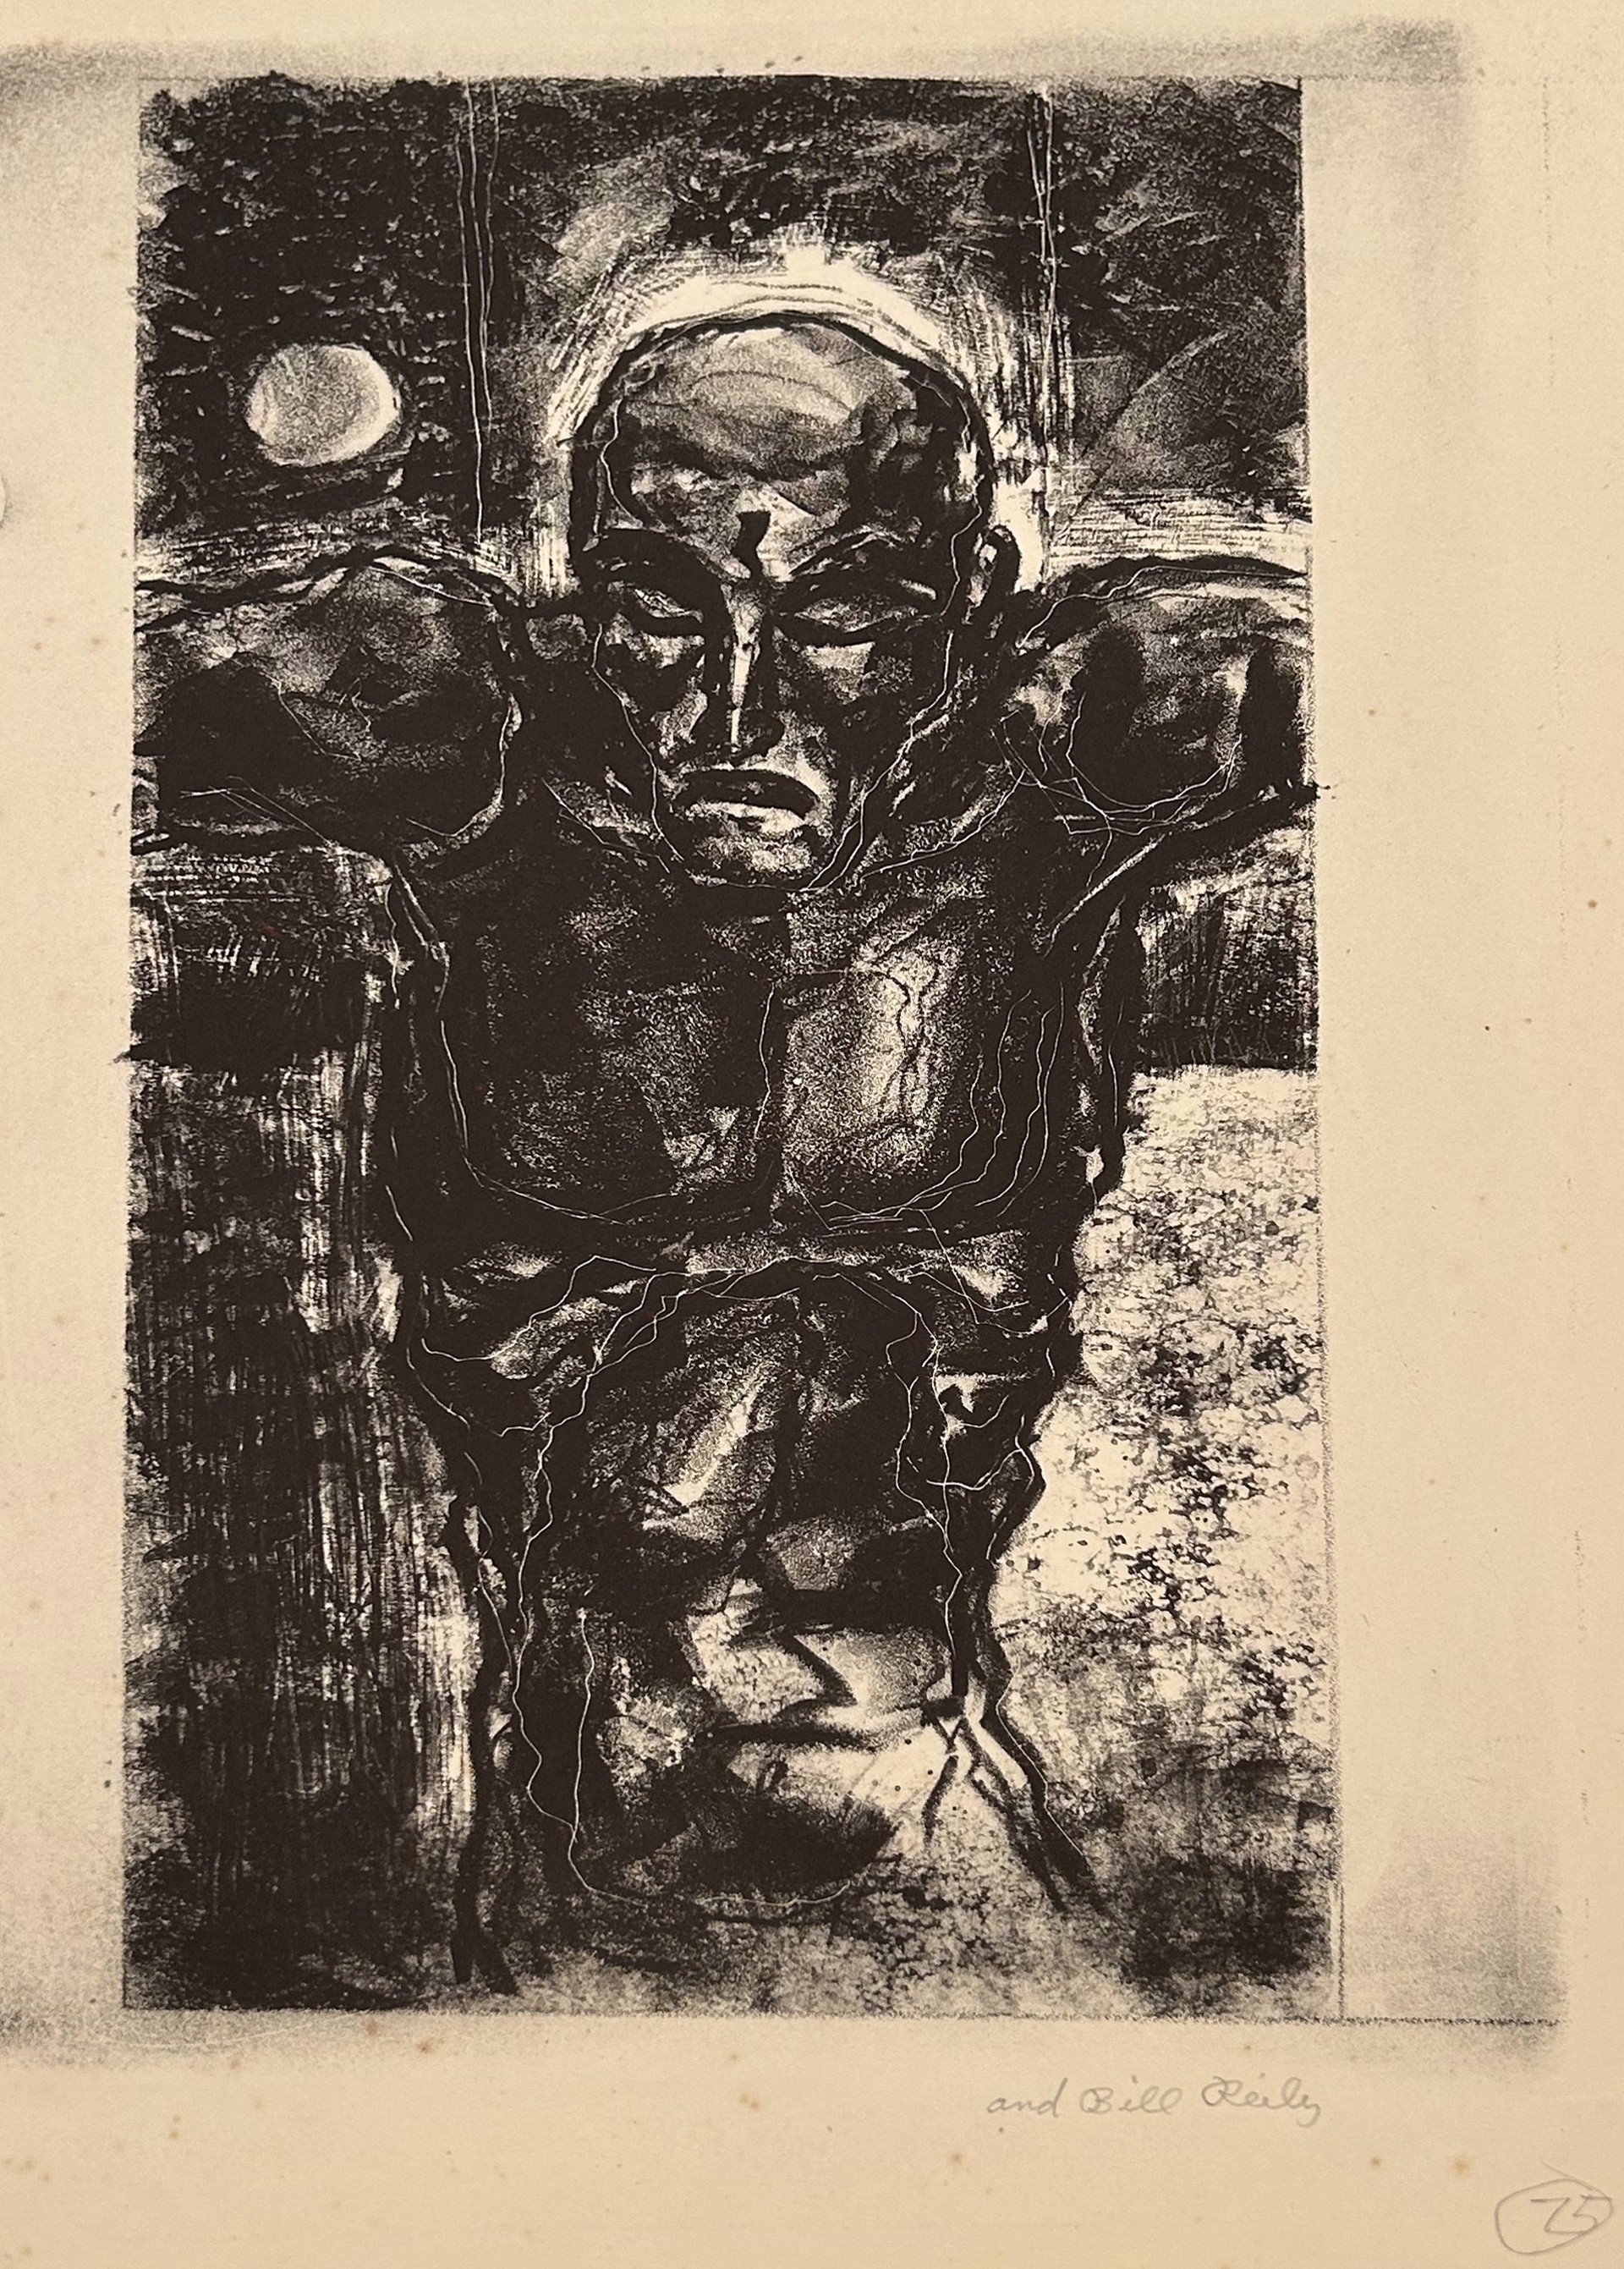 75. Untitled Figure (with Dorothy Jean Kreuger) by Bill Reily Prints